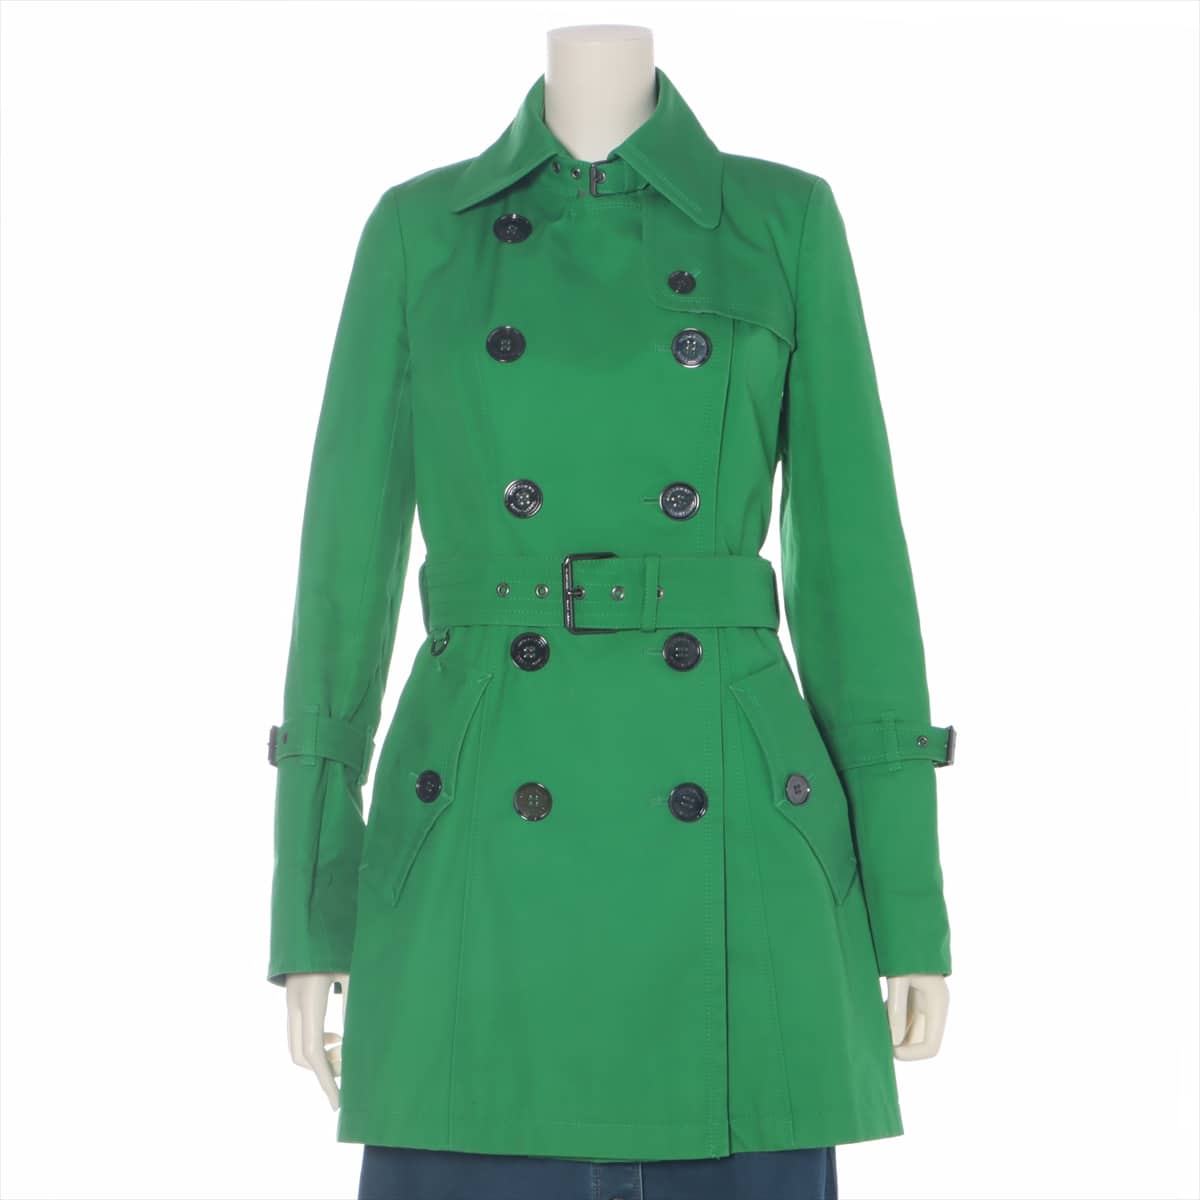 BURBERRY BLUE LABEL Cotton Trench coat 38 Ladies' Green